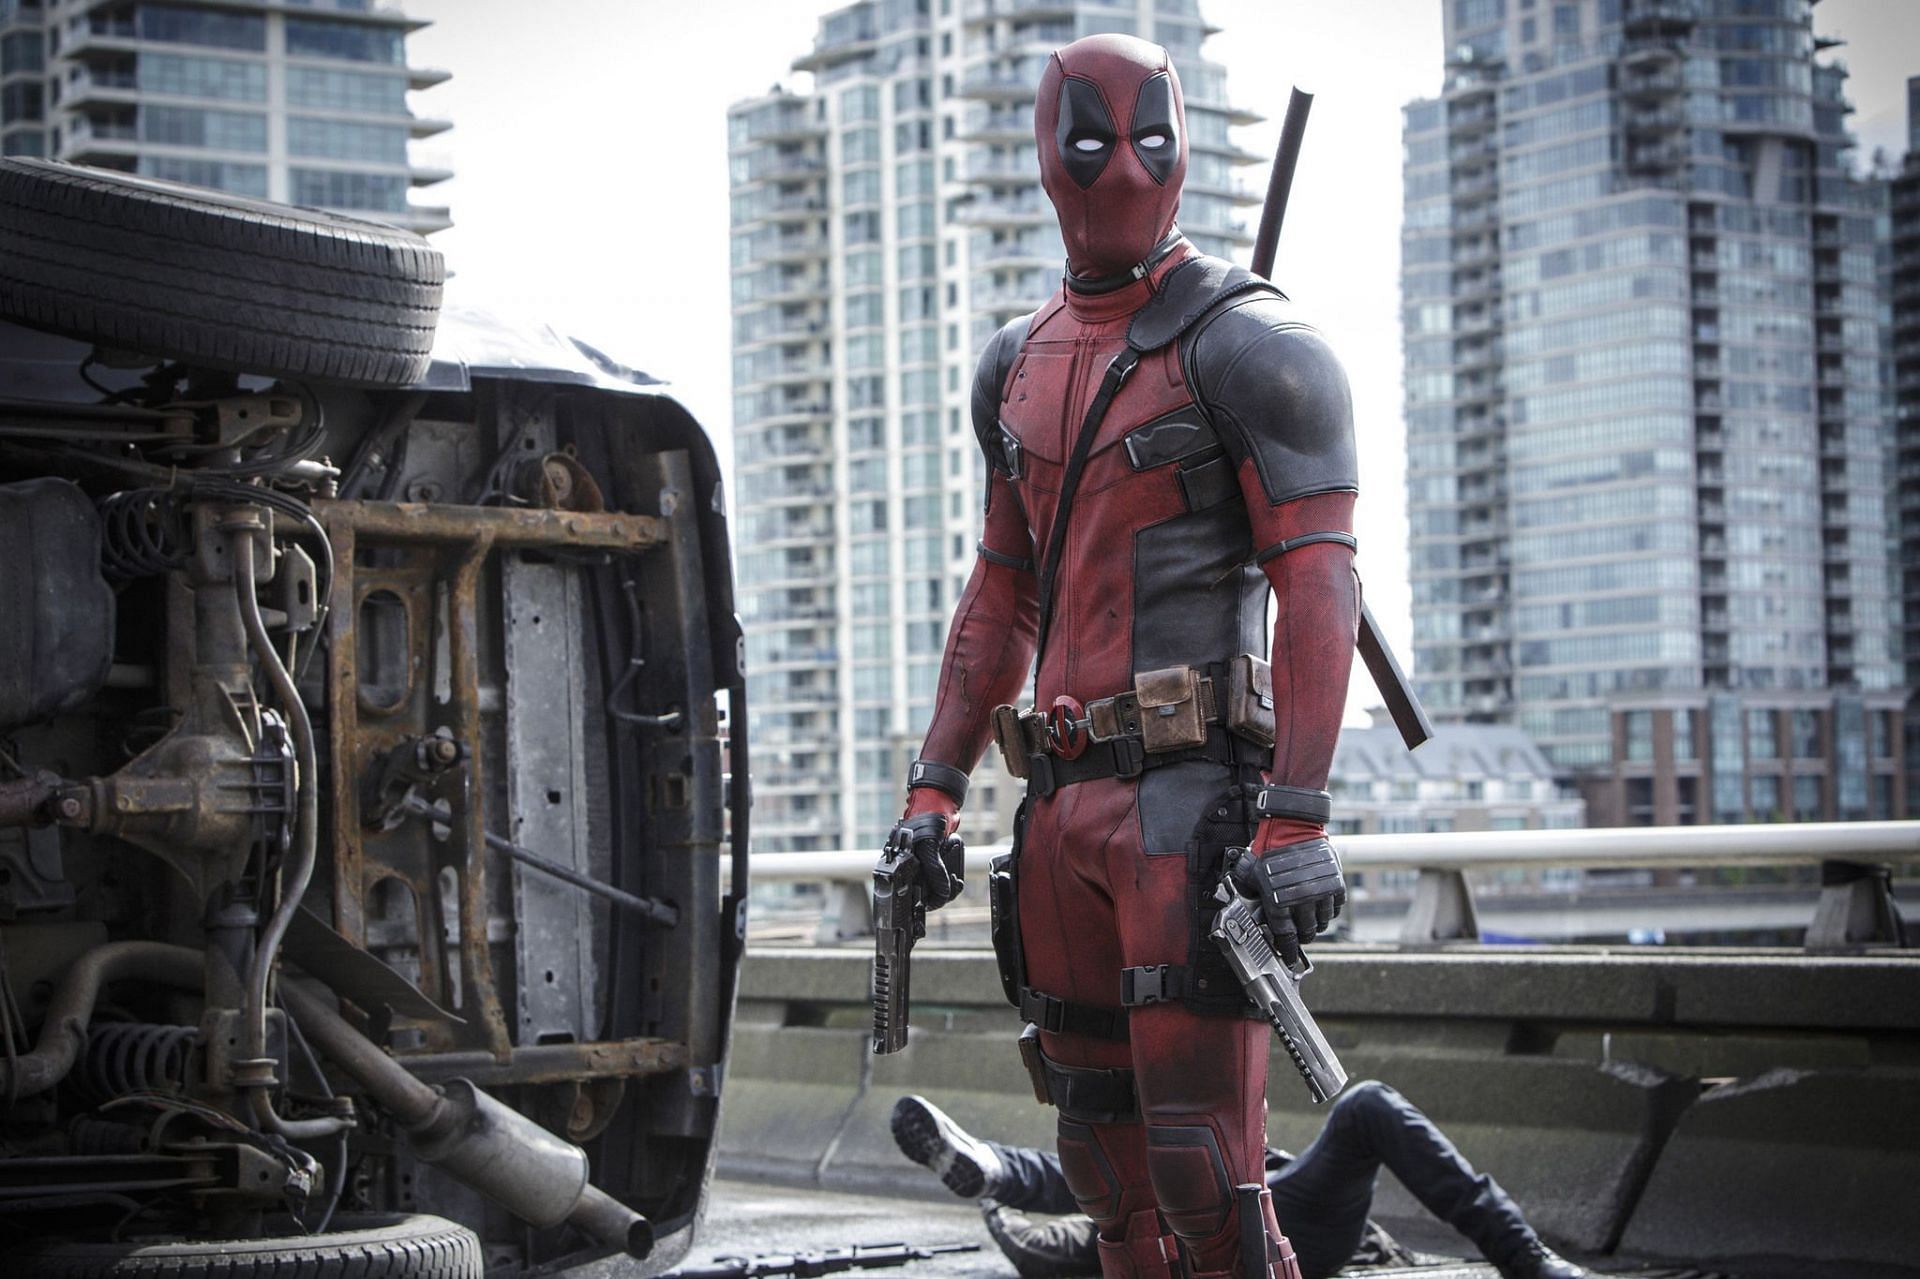 Many feel Deadpool popularized the concept of R-rated comic book movies (Image via 20th Century Fox)